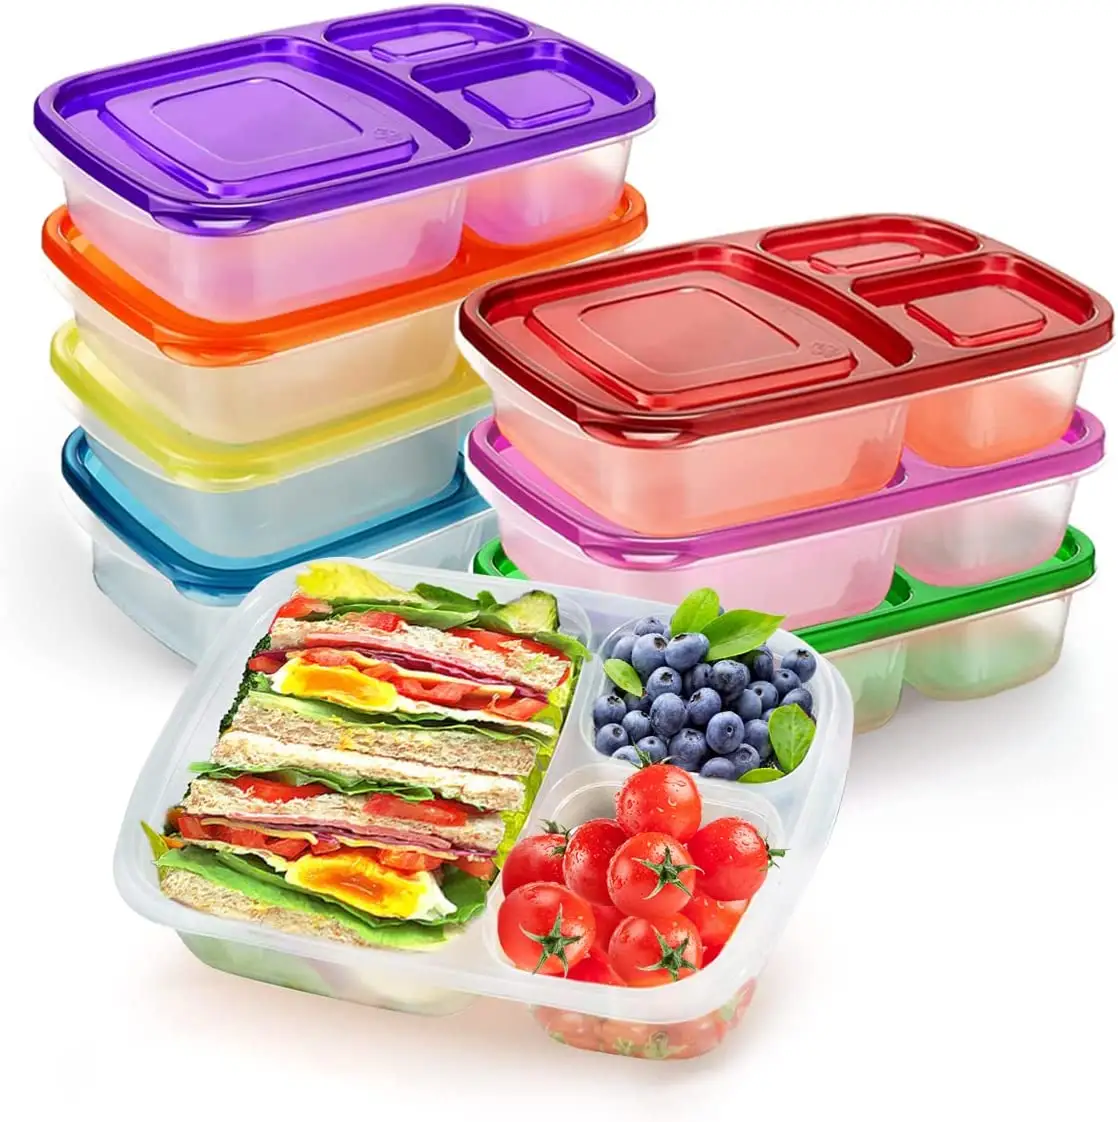 Custom Perfect Kids Bento Lunch 3 Compartment Food Set of 7 Pack Storage Meal prep Container Boxes